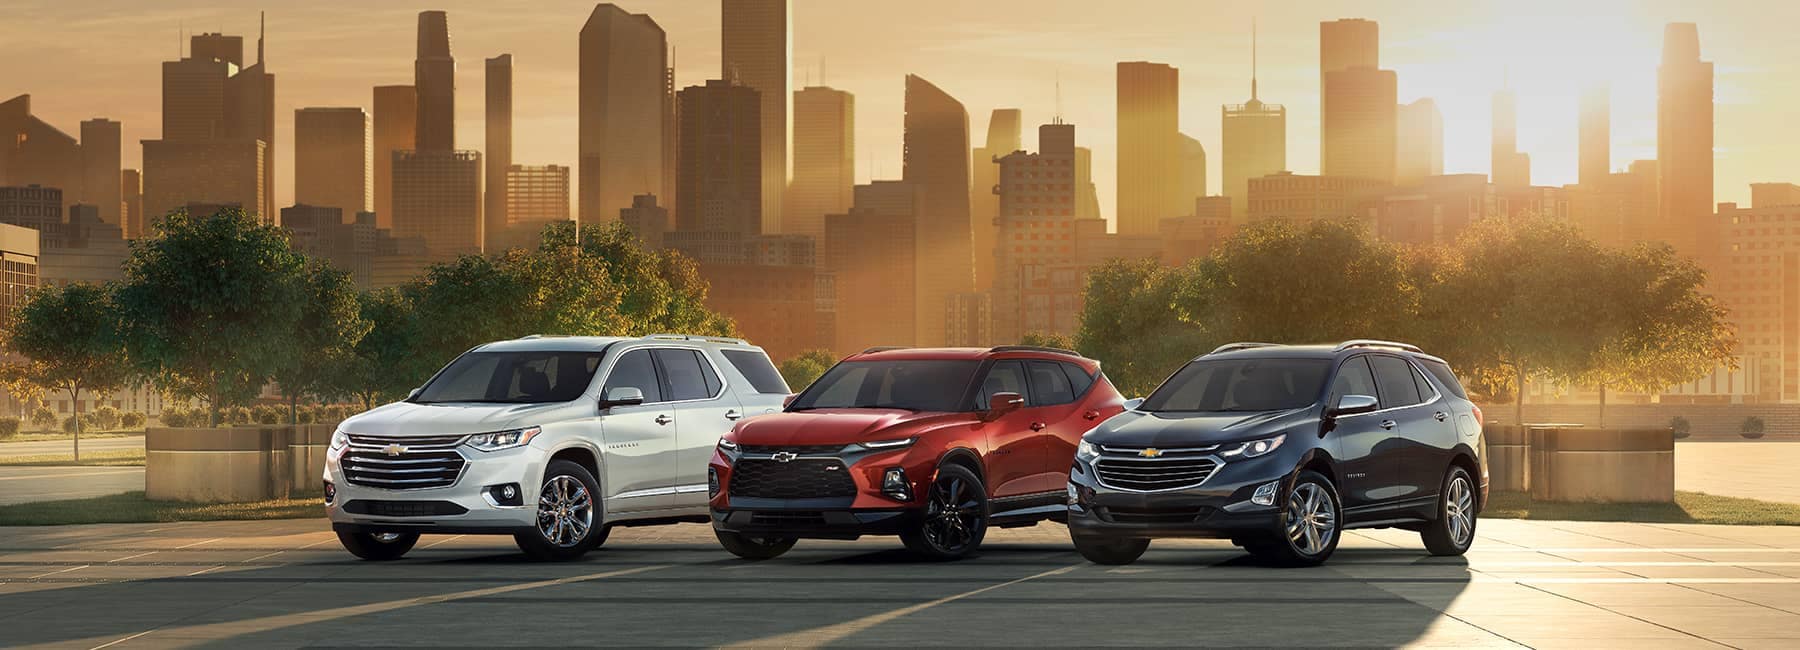 2020 Chevrolet Lineup Against a City Skyline at Sunset_mobile